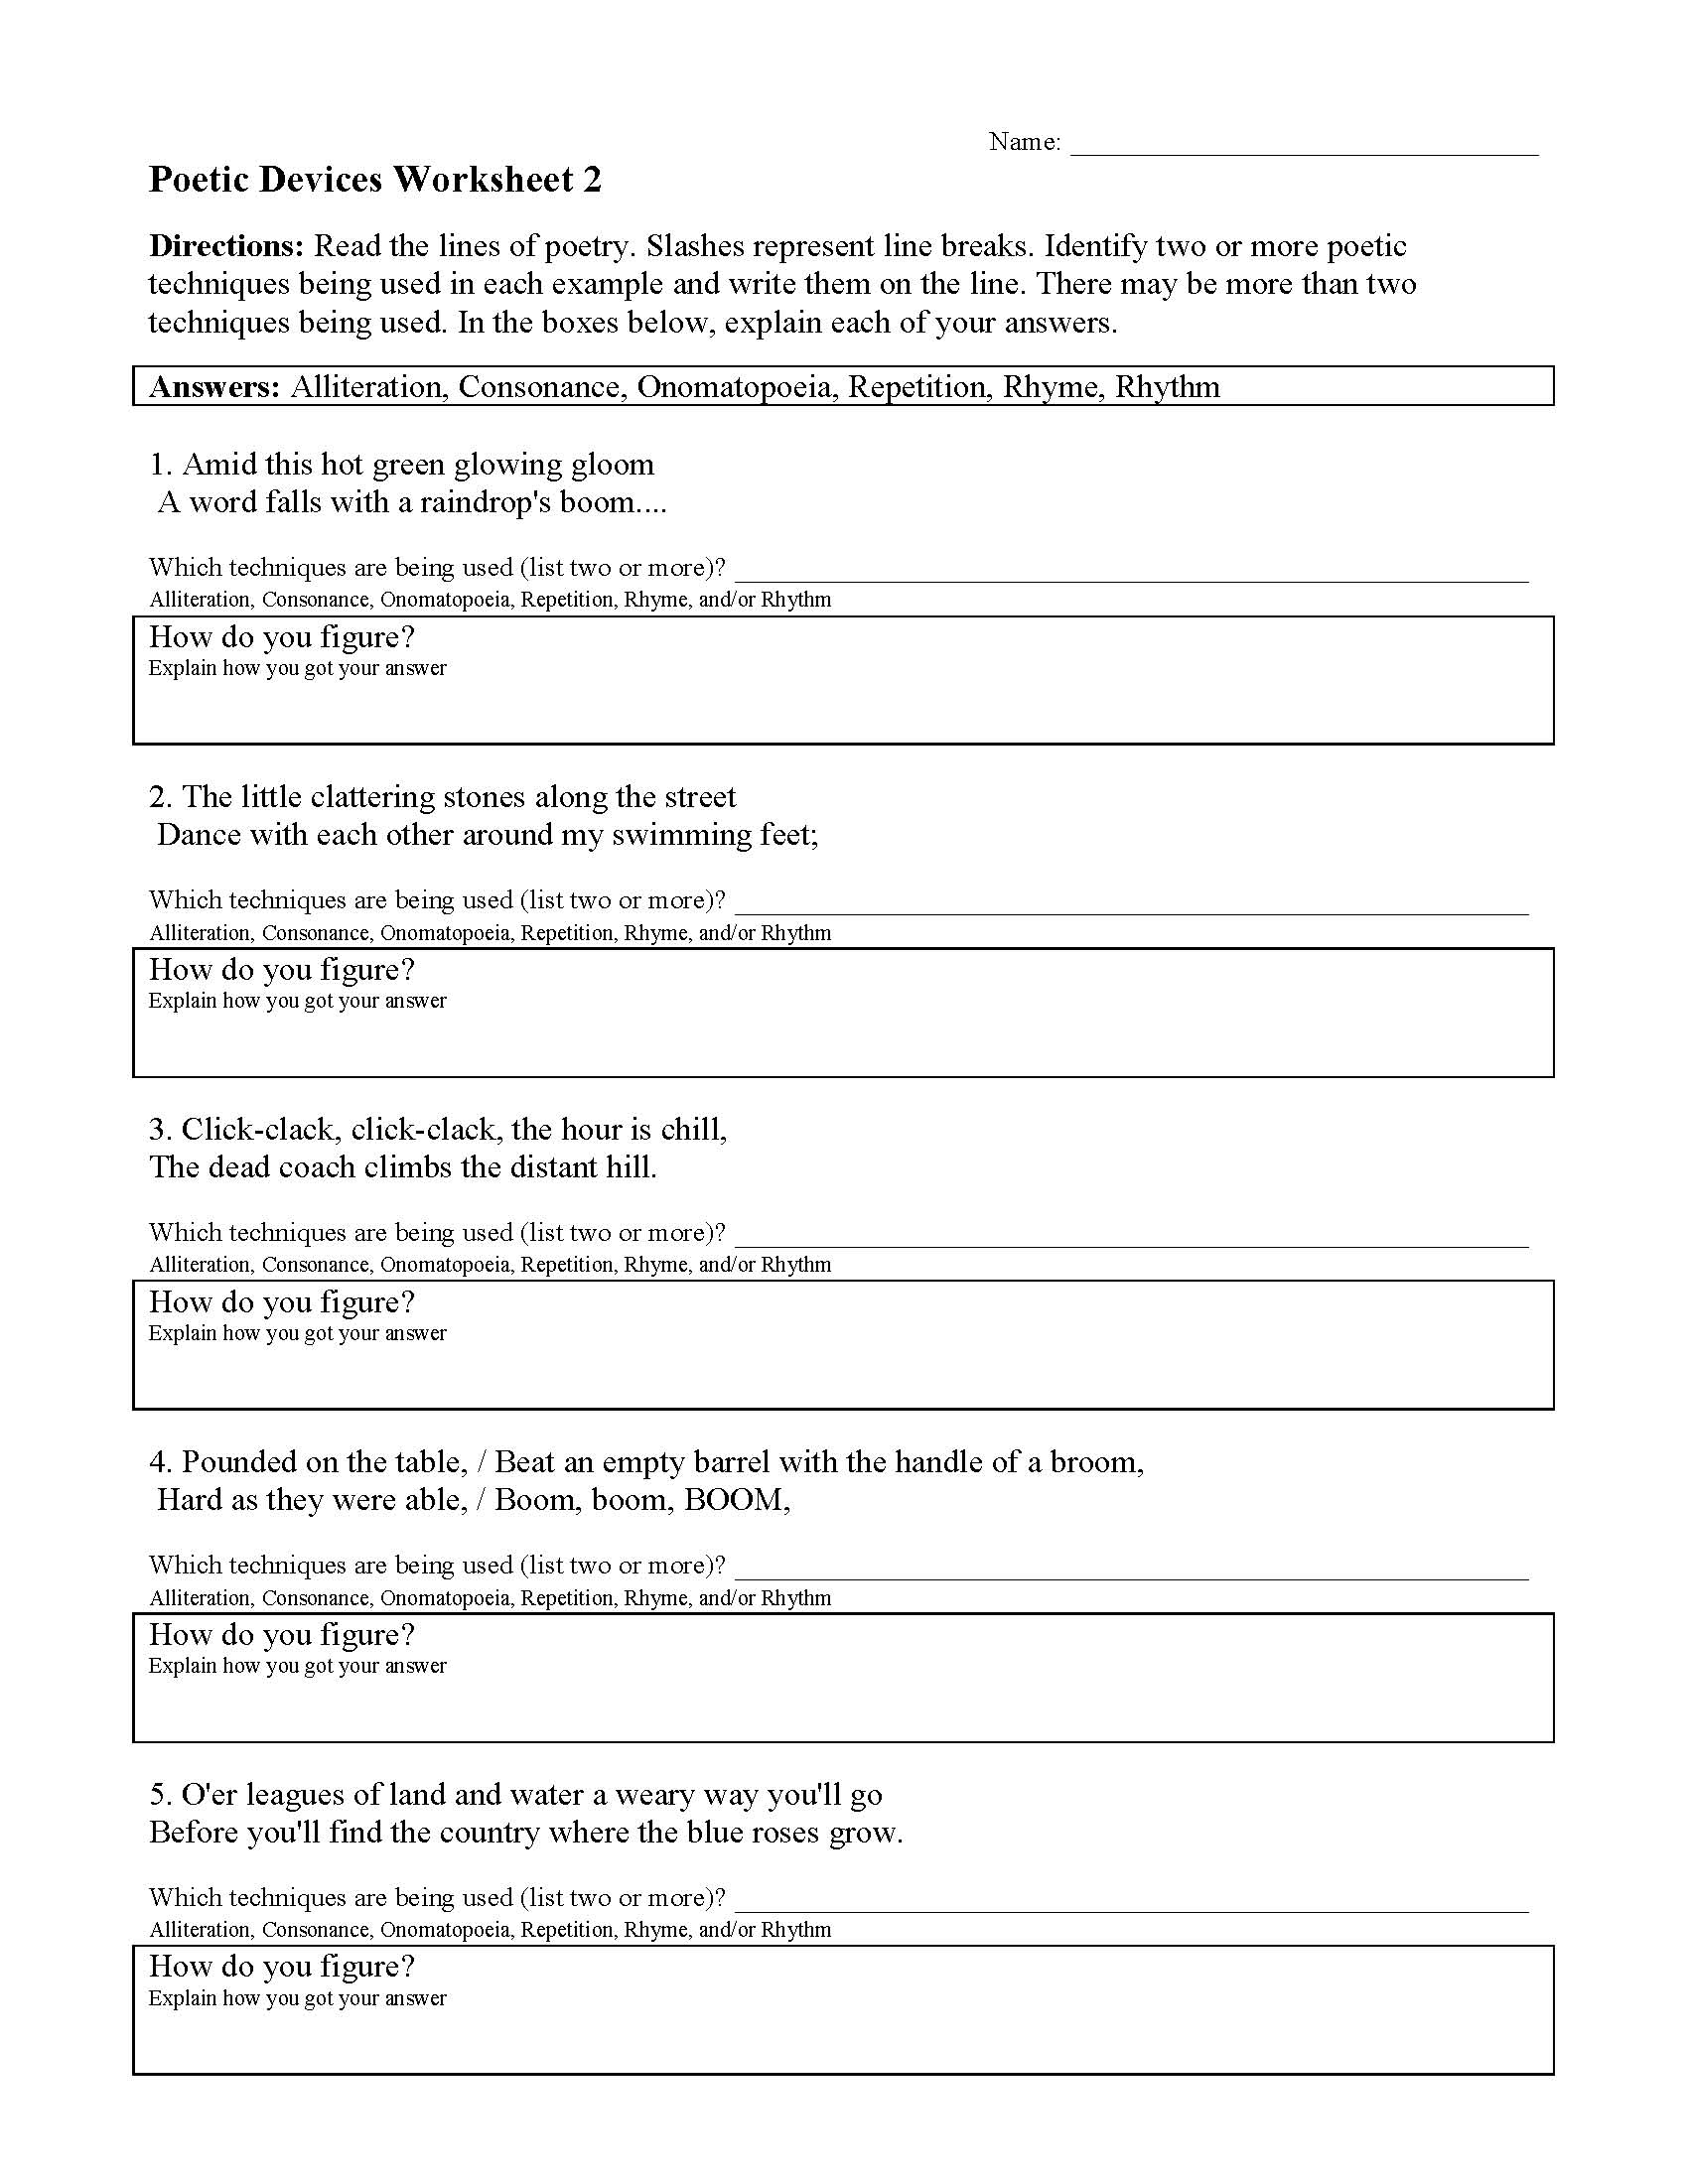 Poetic Devices Worksheet 2 | Preview